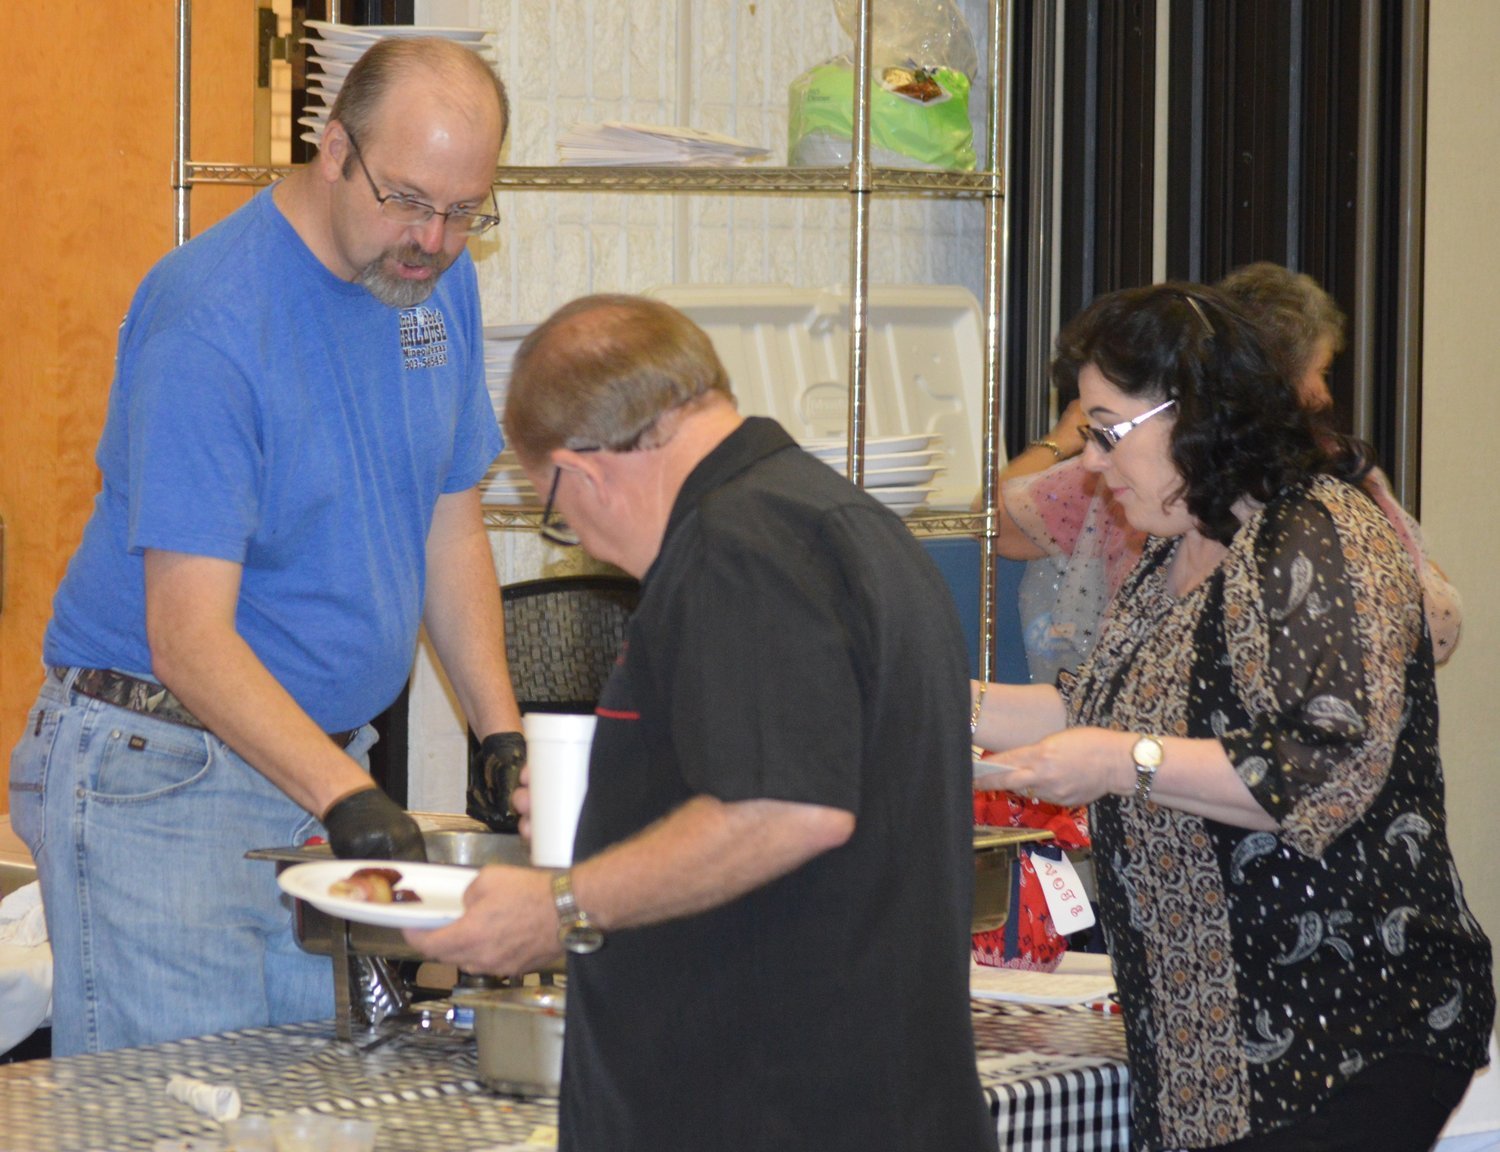 Brad Cobern, owner of Uncle Bubba’s Grillhouse in Mineola, serves food to guests at the 20th Annual Taste of East Texas event on Saturday night at the Mineola Civic Center.